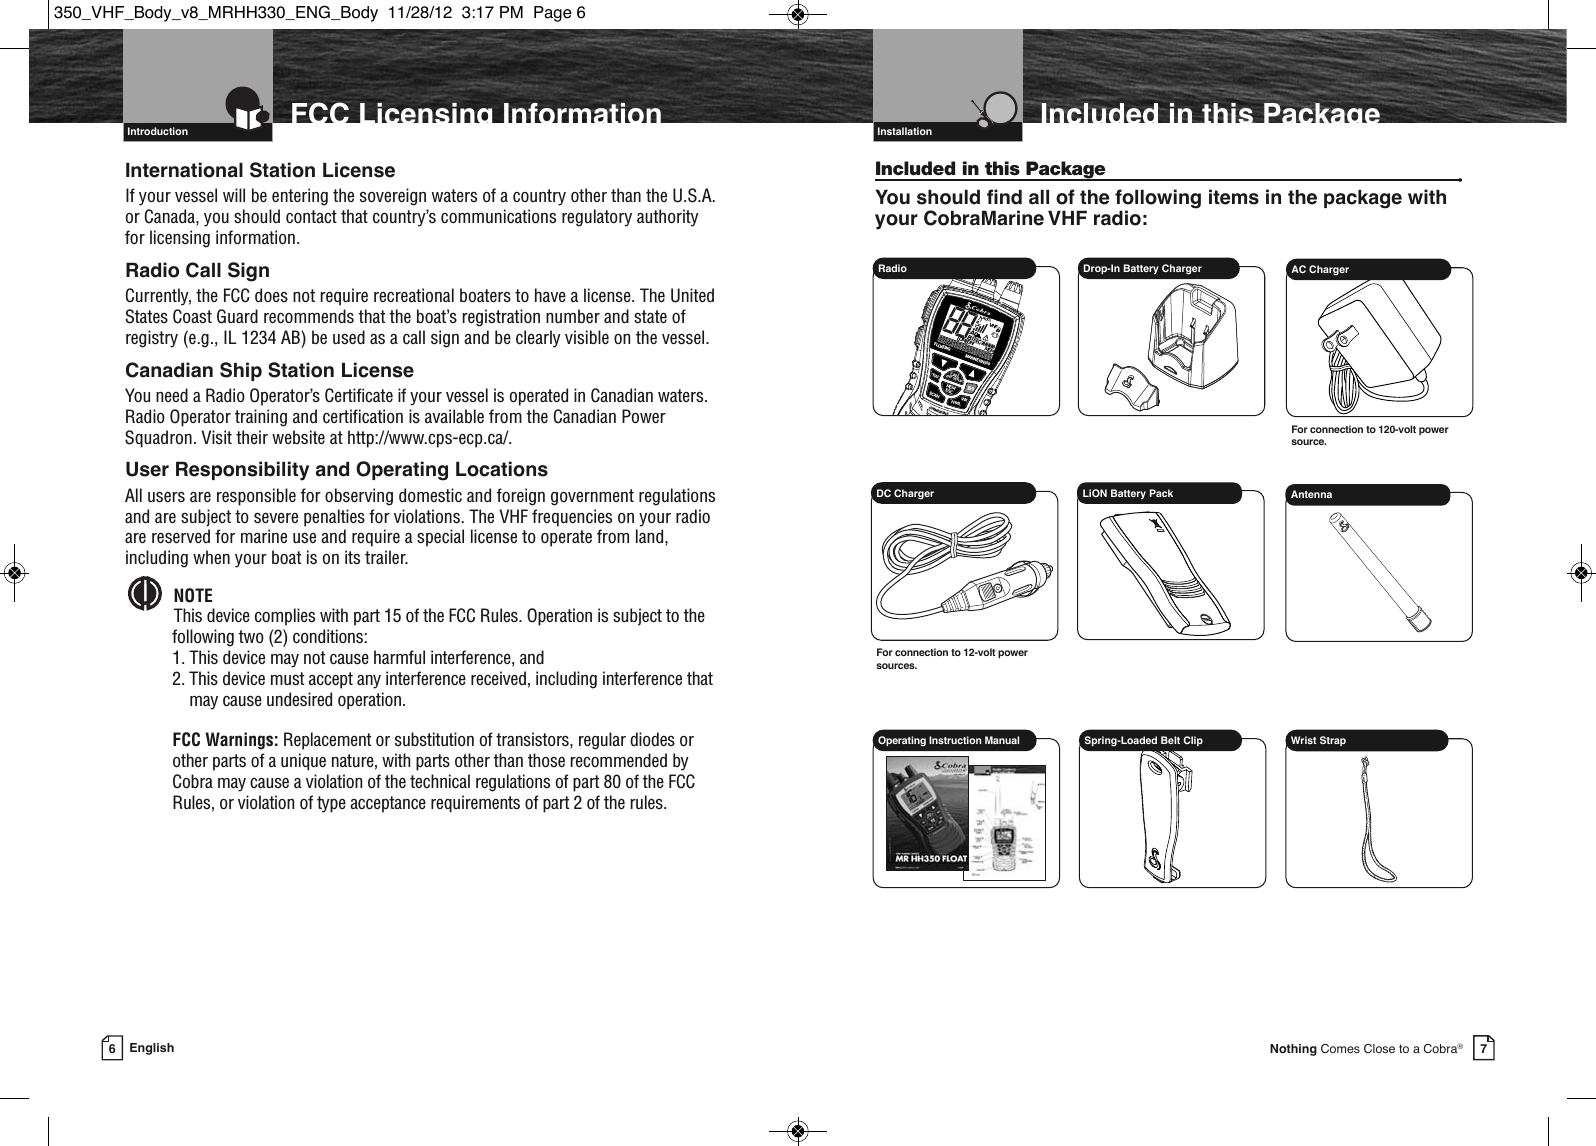 Page 6 of Cobra Electronics MRHH350 MARINE TRANSCEIVER User Manual MRHH330 ENG Body